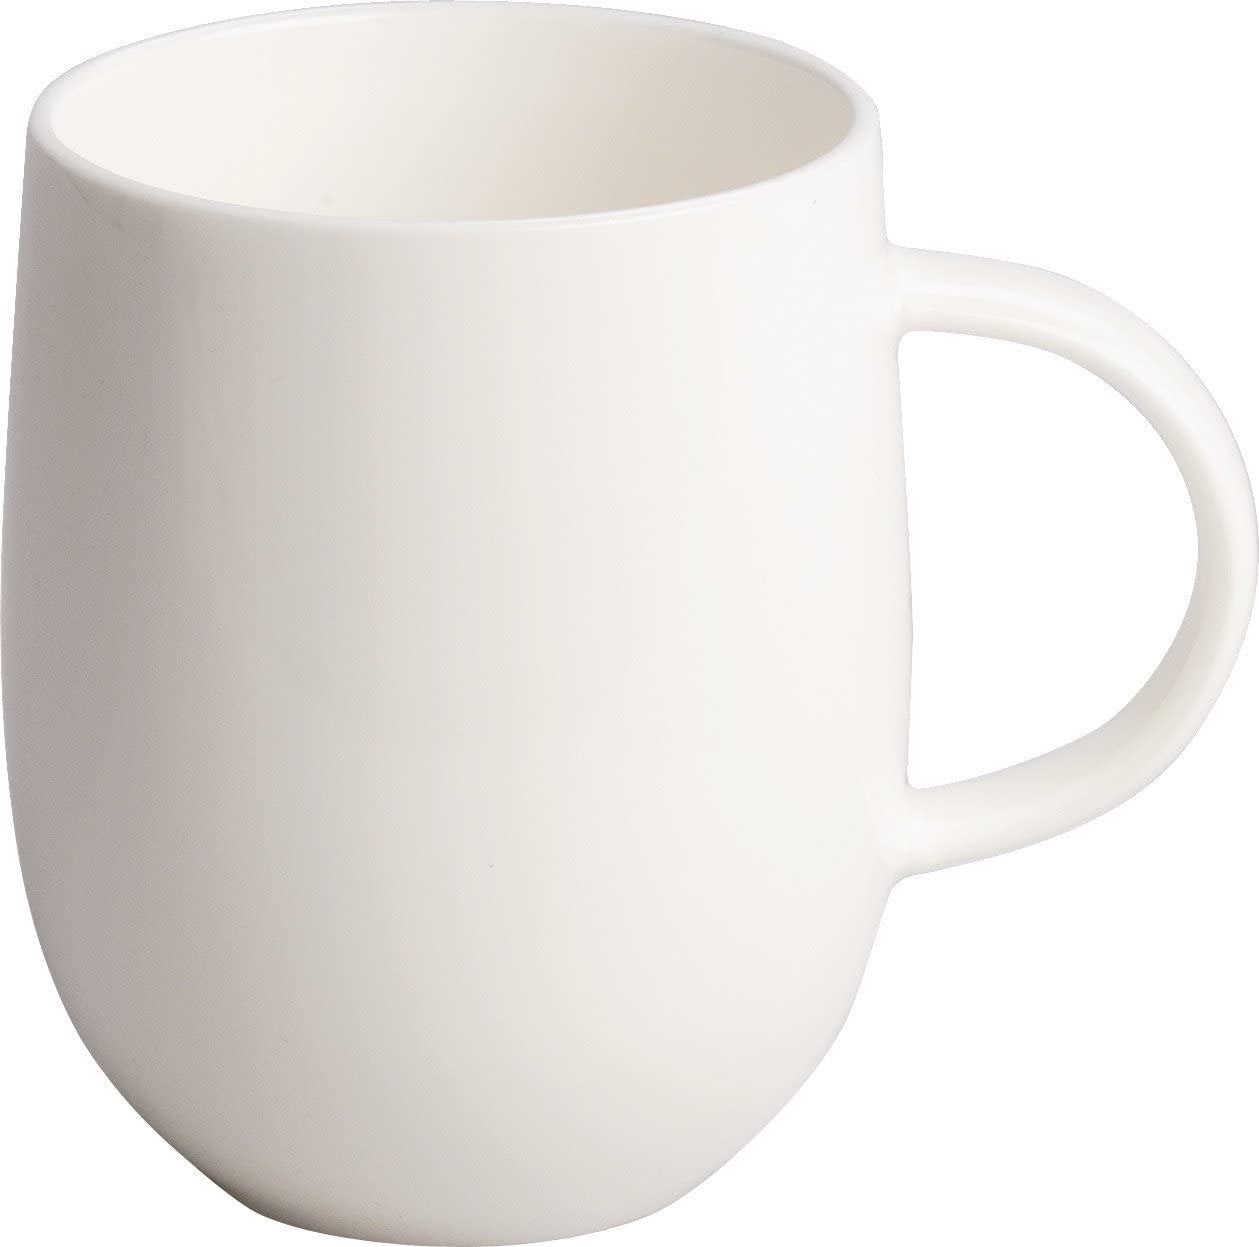 \'Alessi \"All Time Pack Of 4) Mug/Cup with Handle